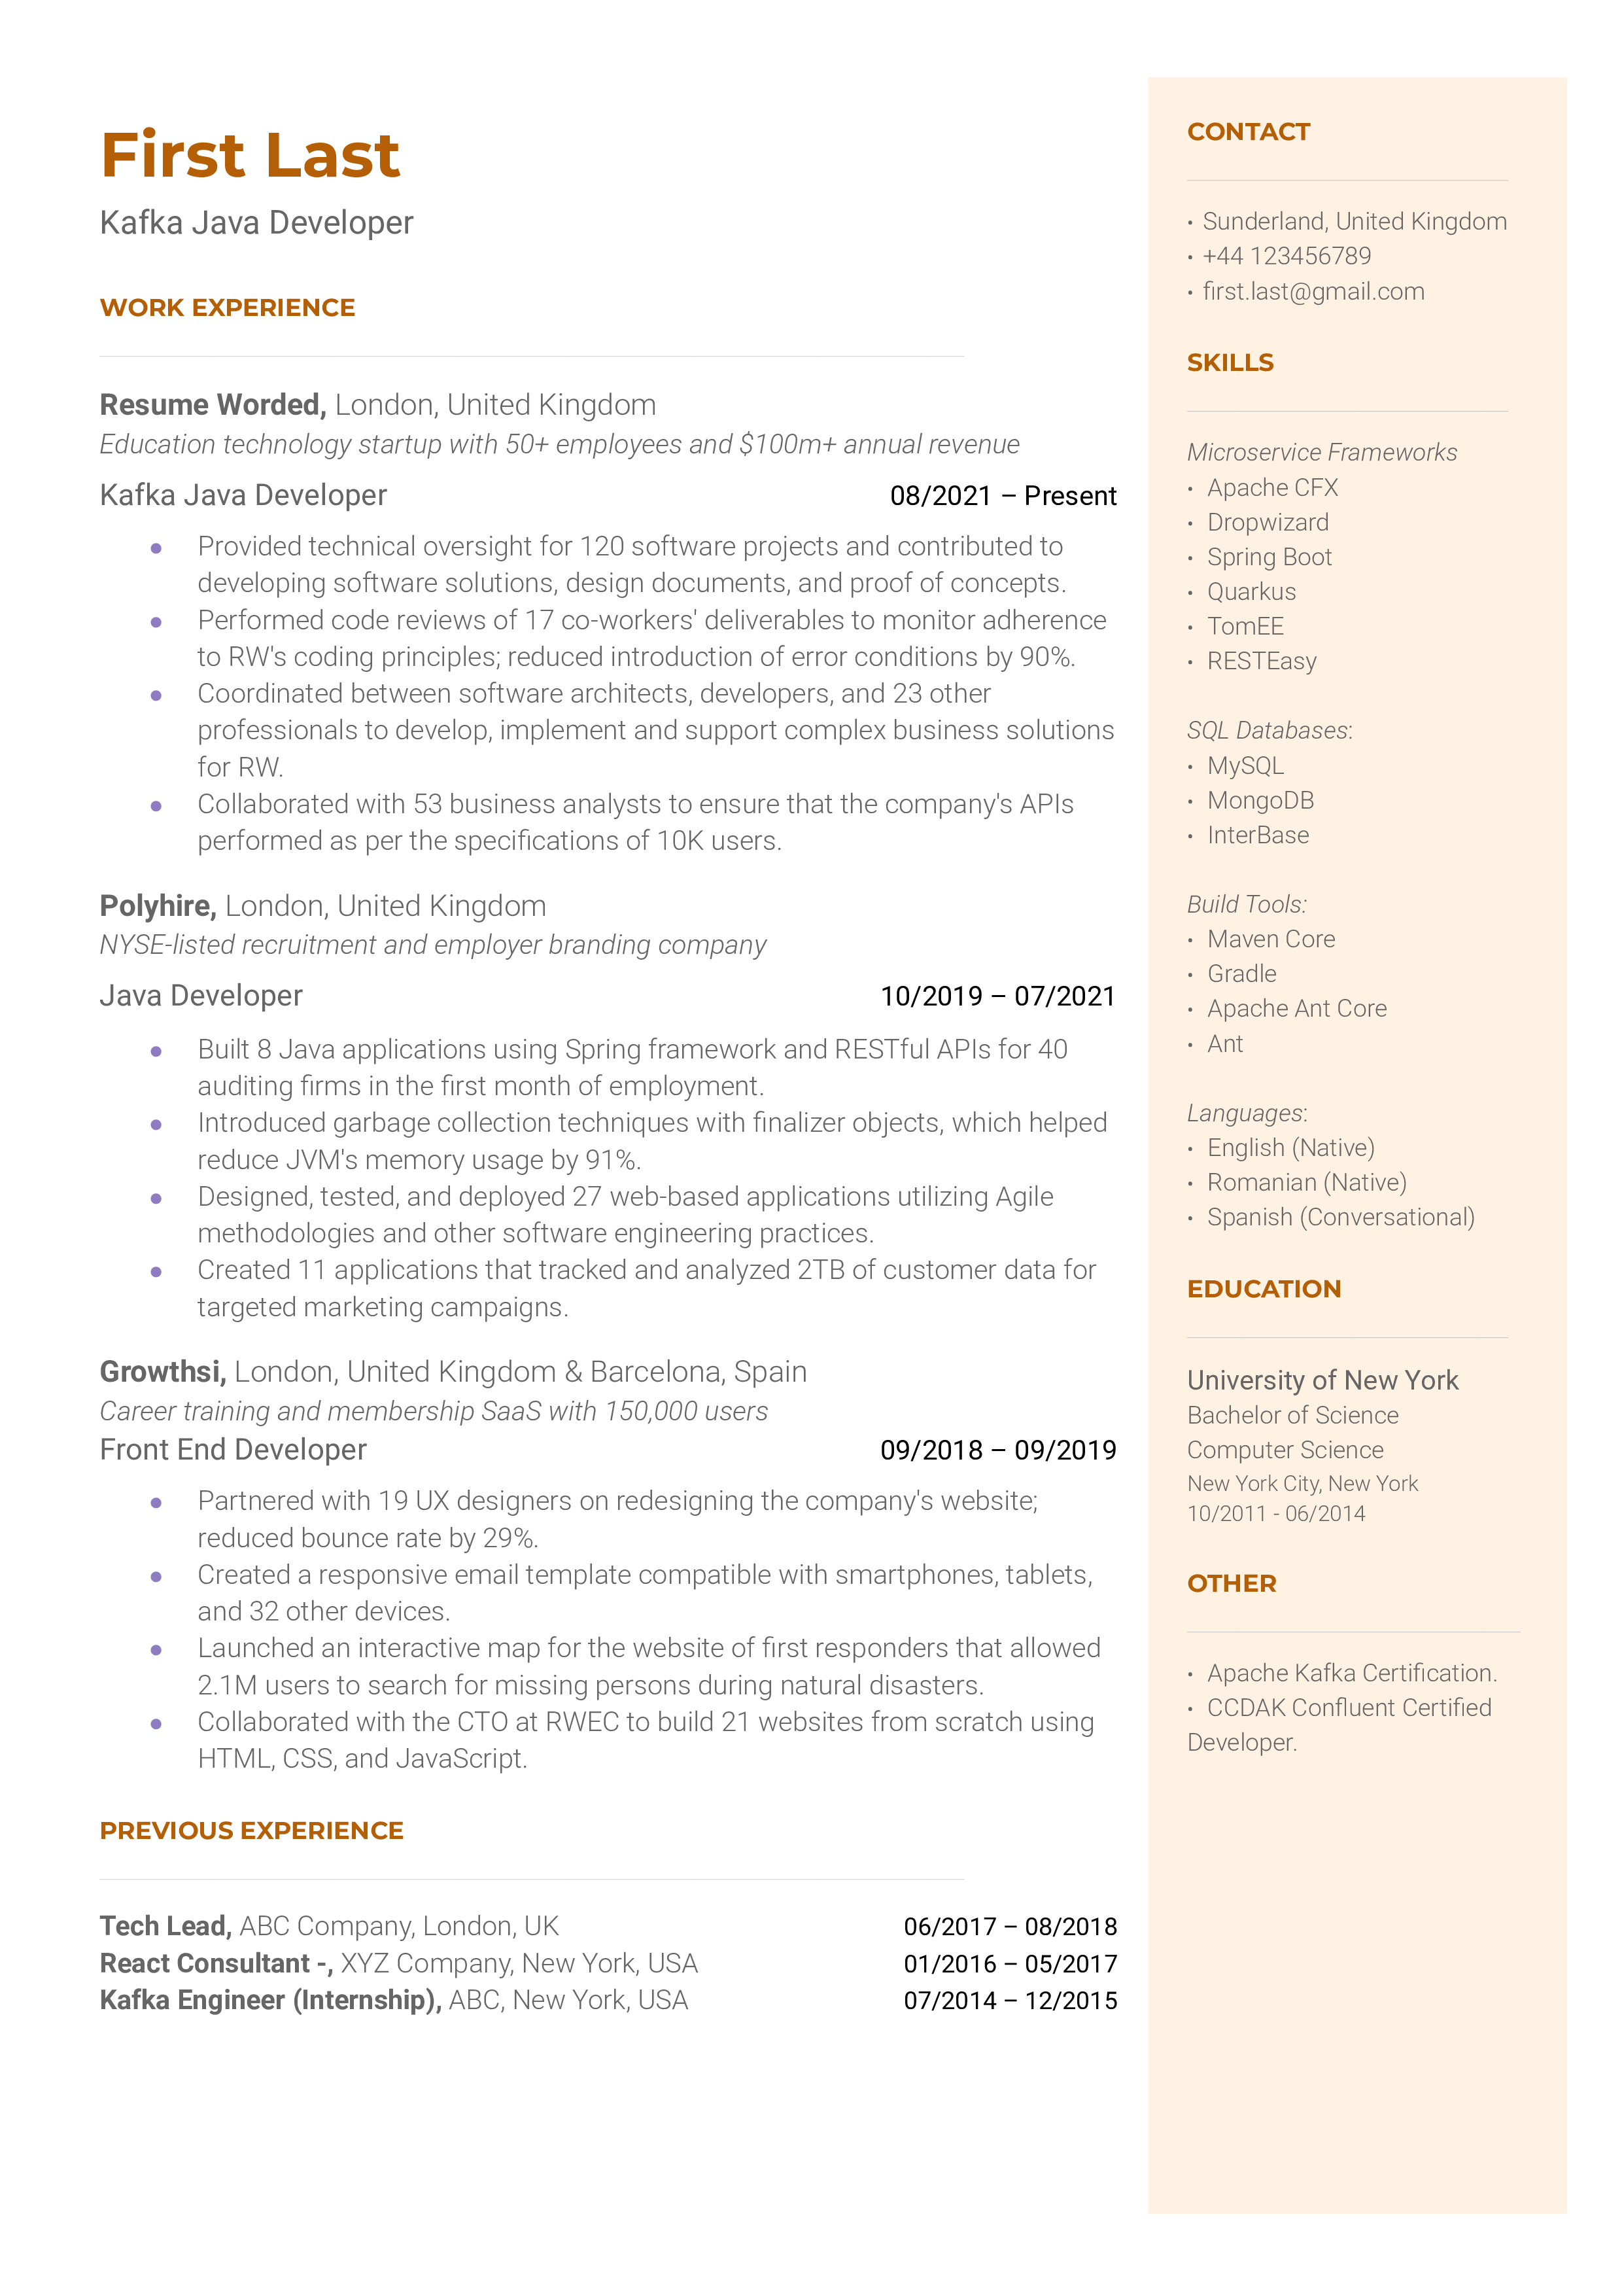 A Kafka Java developer resume template that’s tailored to the software development industry